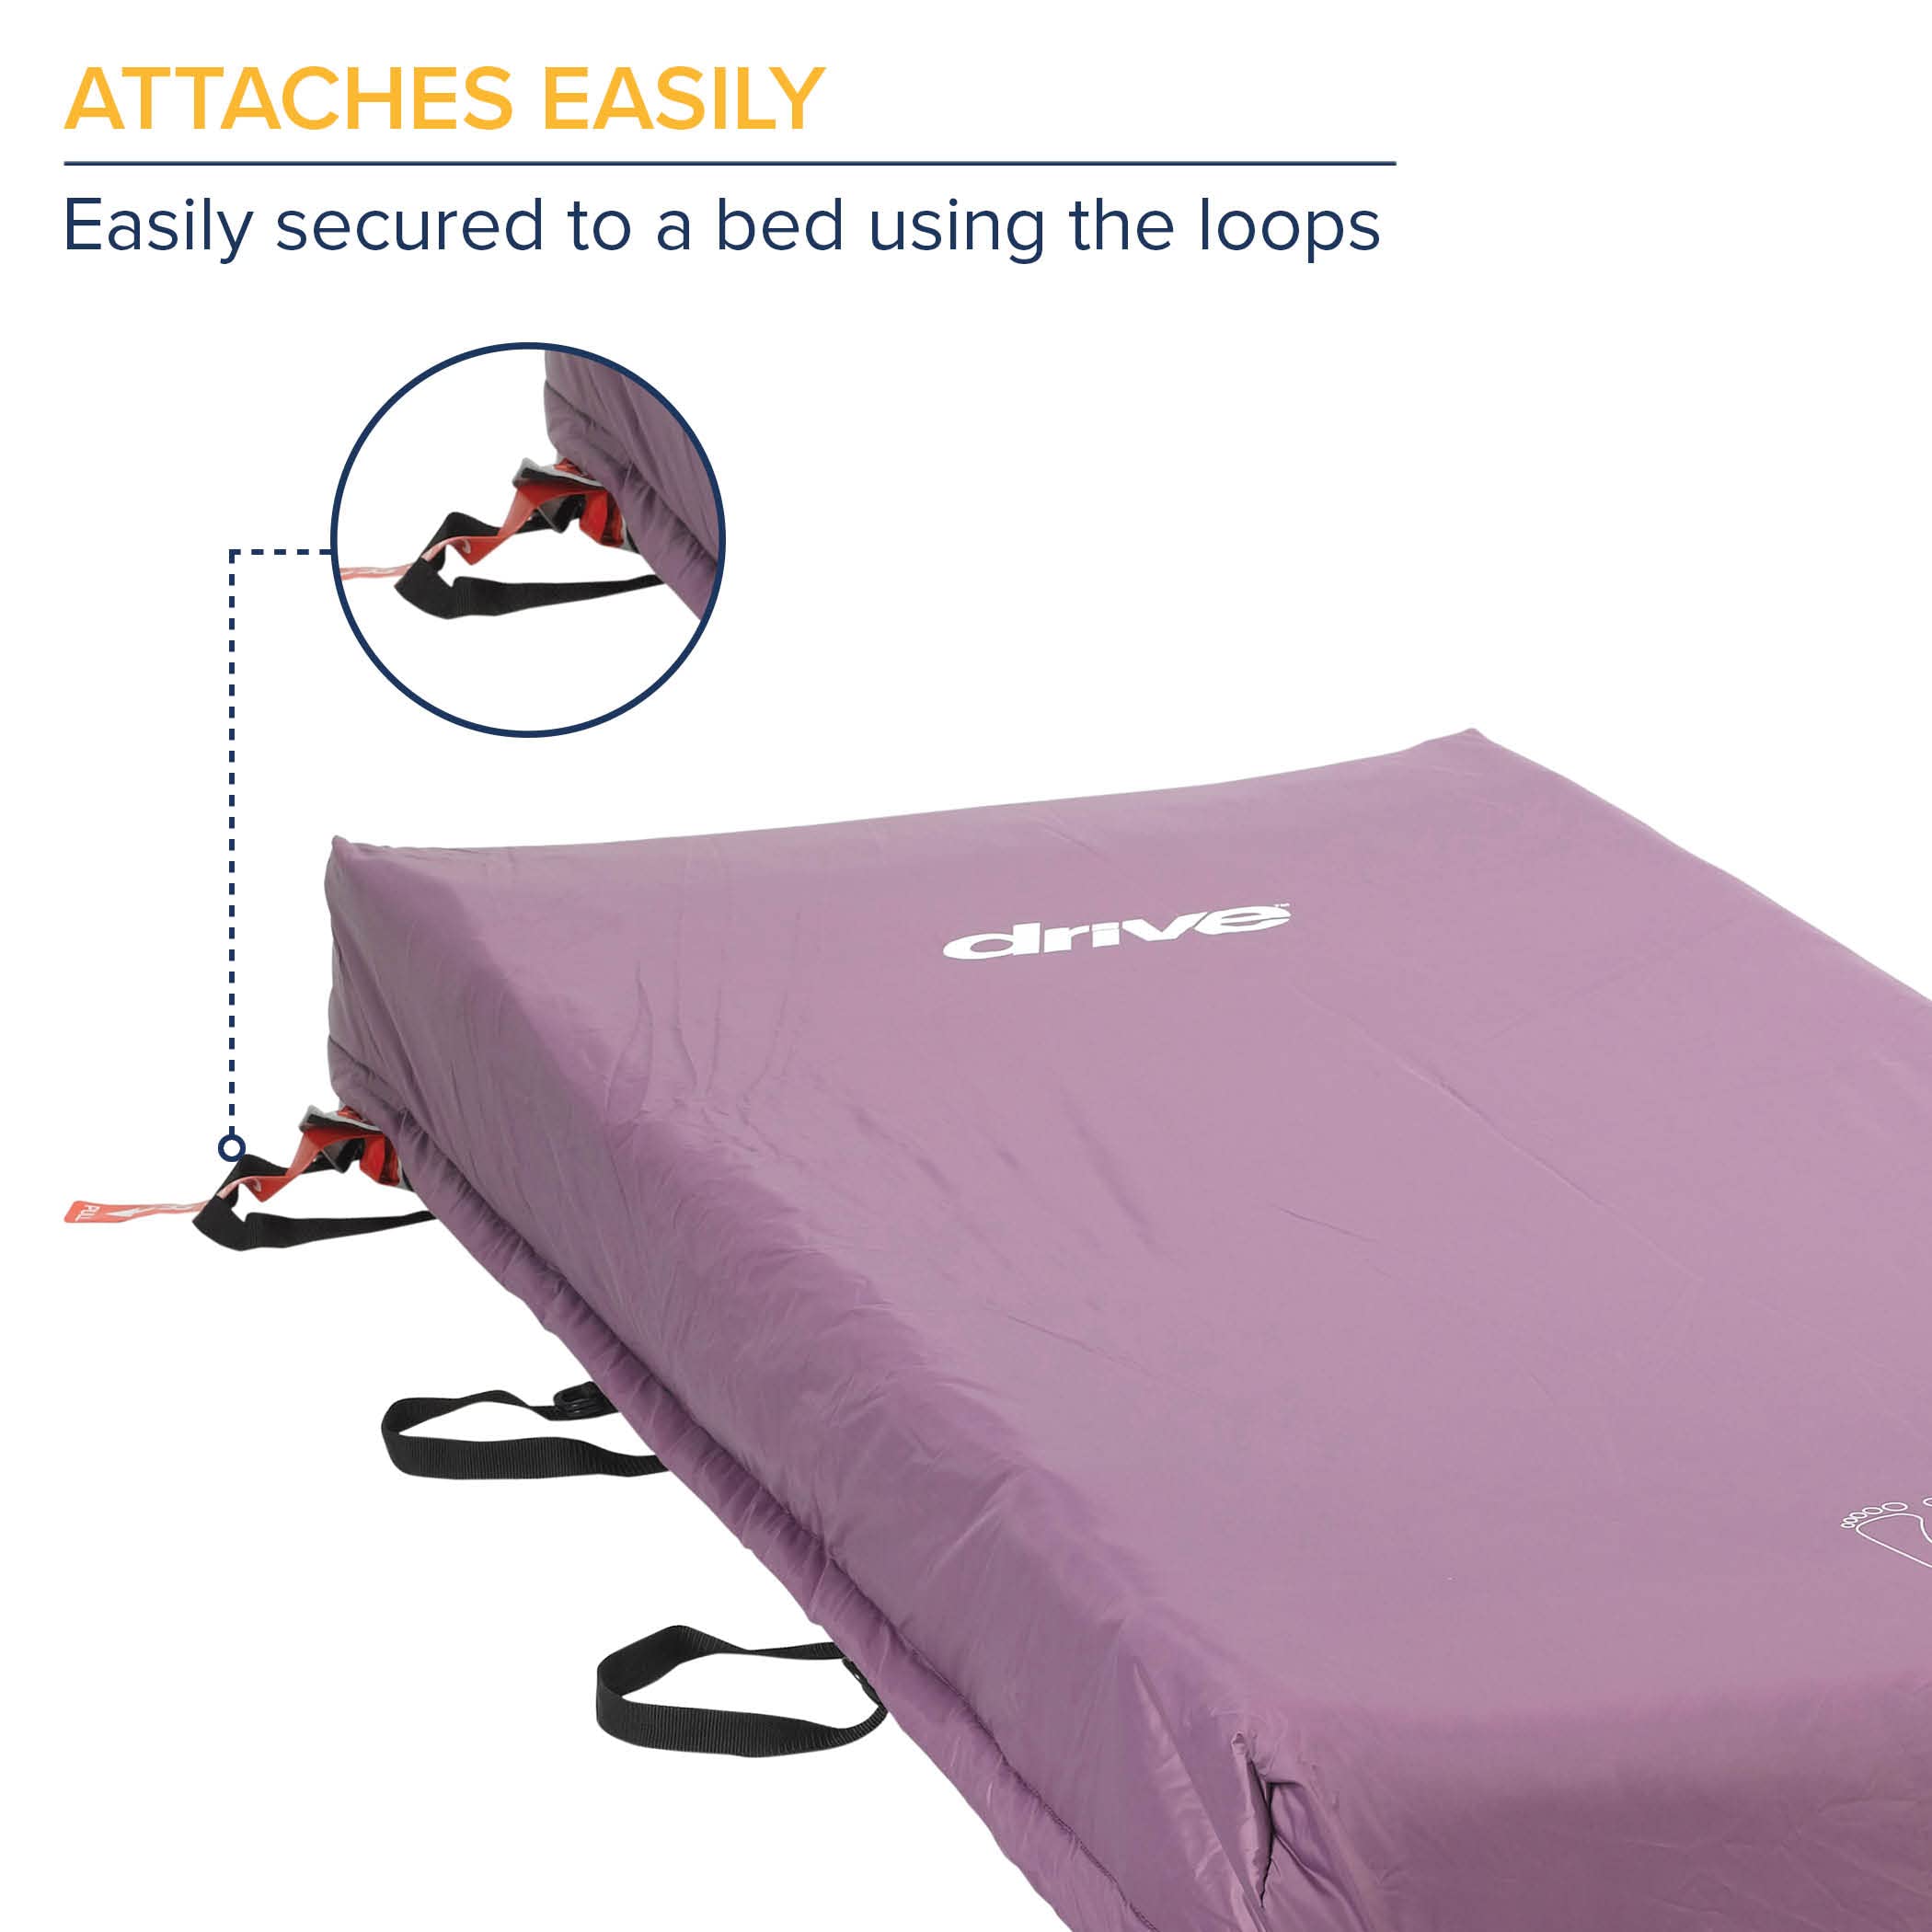 Drive Medical 14027 Med-Aire Low Air Loss Mattress Replacement System with Alternating Pressure, Dark Purple